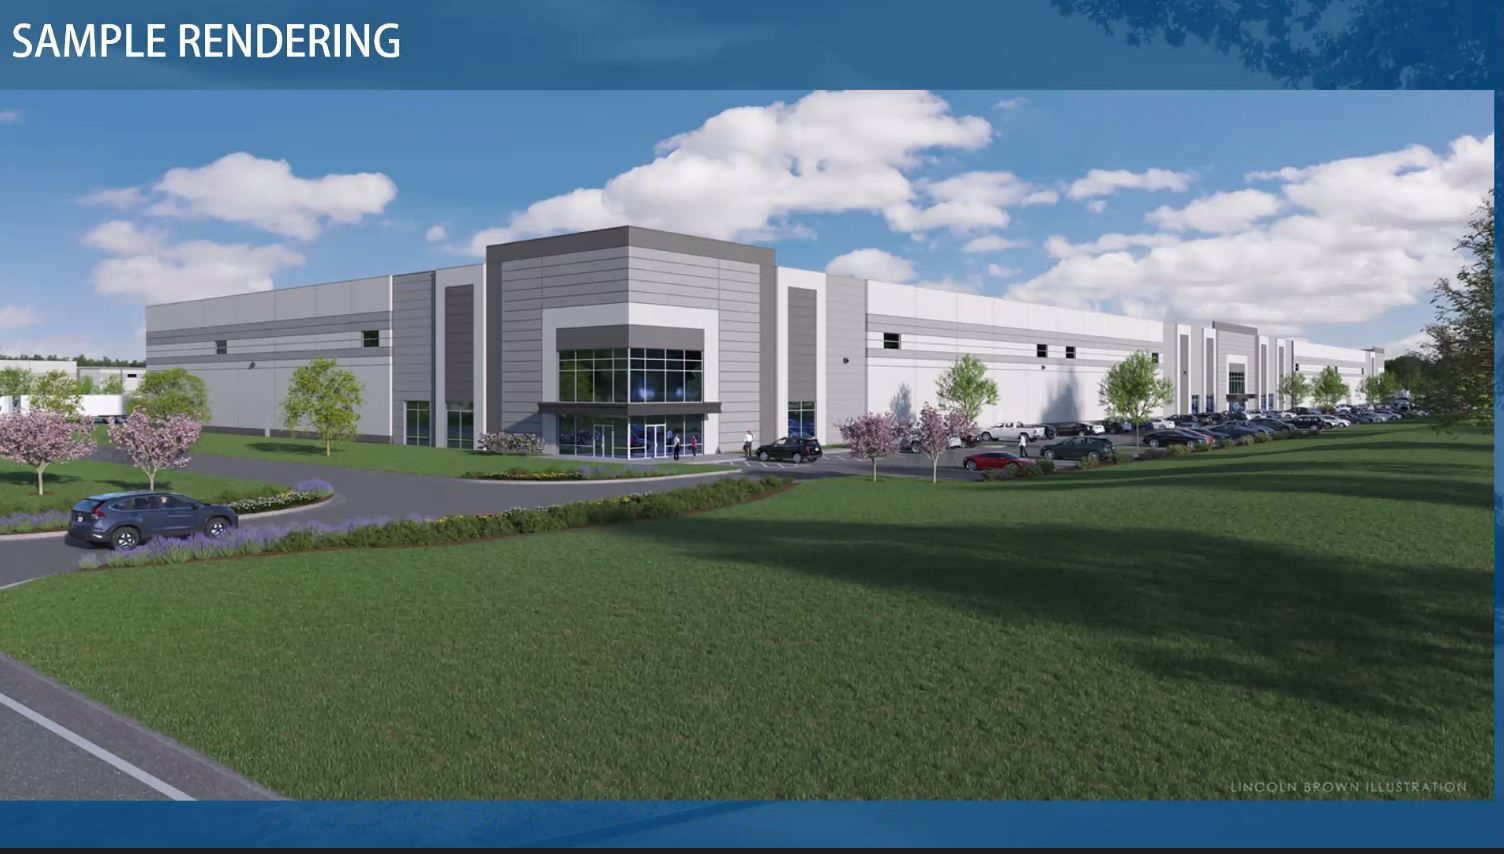 Indianapolis developer Scannell Properties would oversee the construction of the 342,000-square-foot facility in Platteville (Wis.) Industrial Park.  PHOTO CREDIT: Contributed